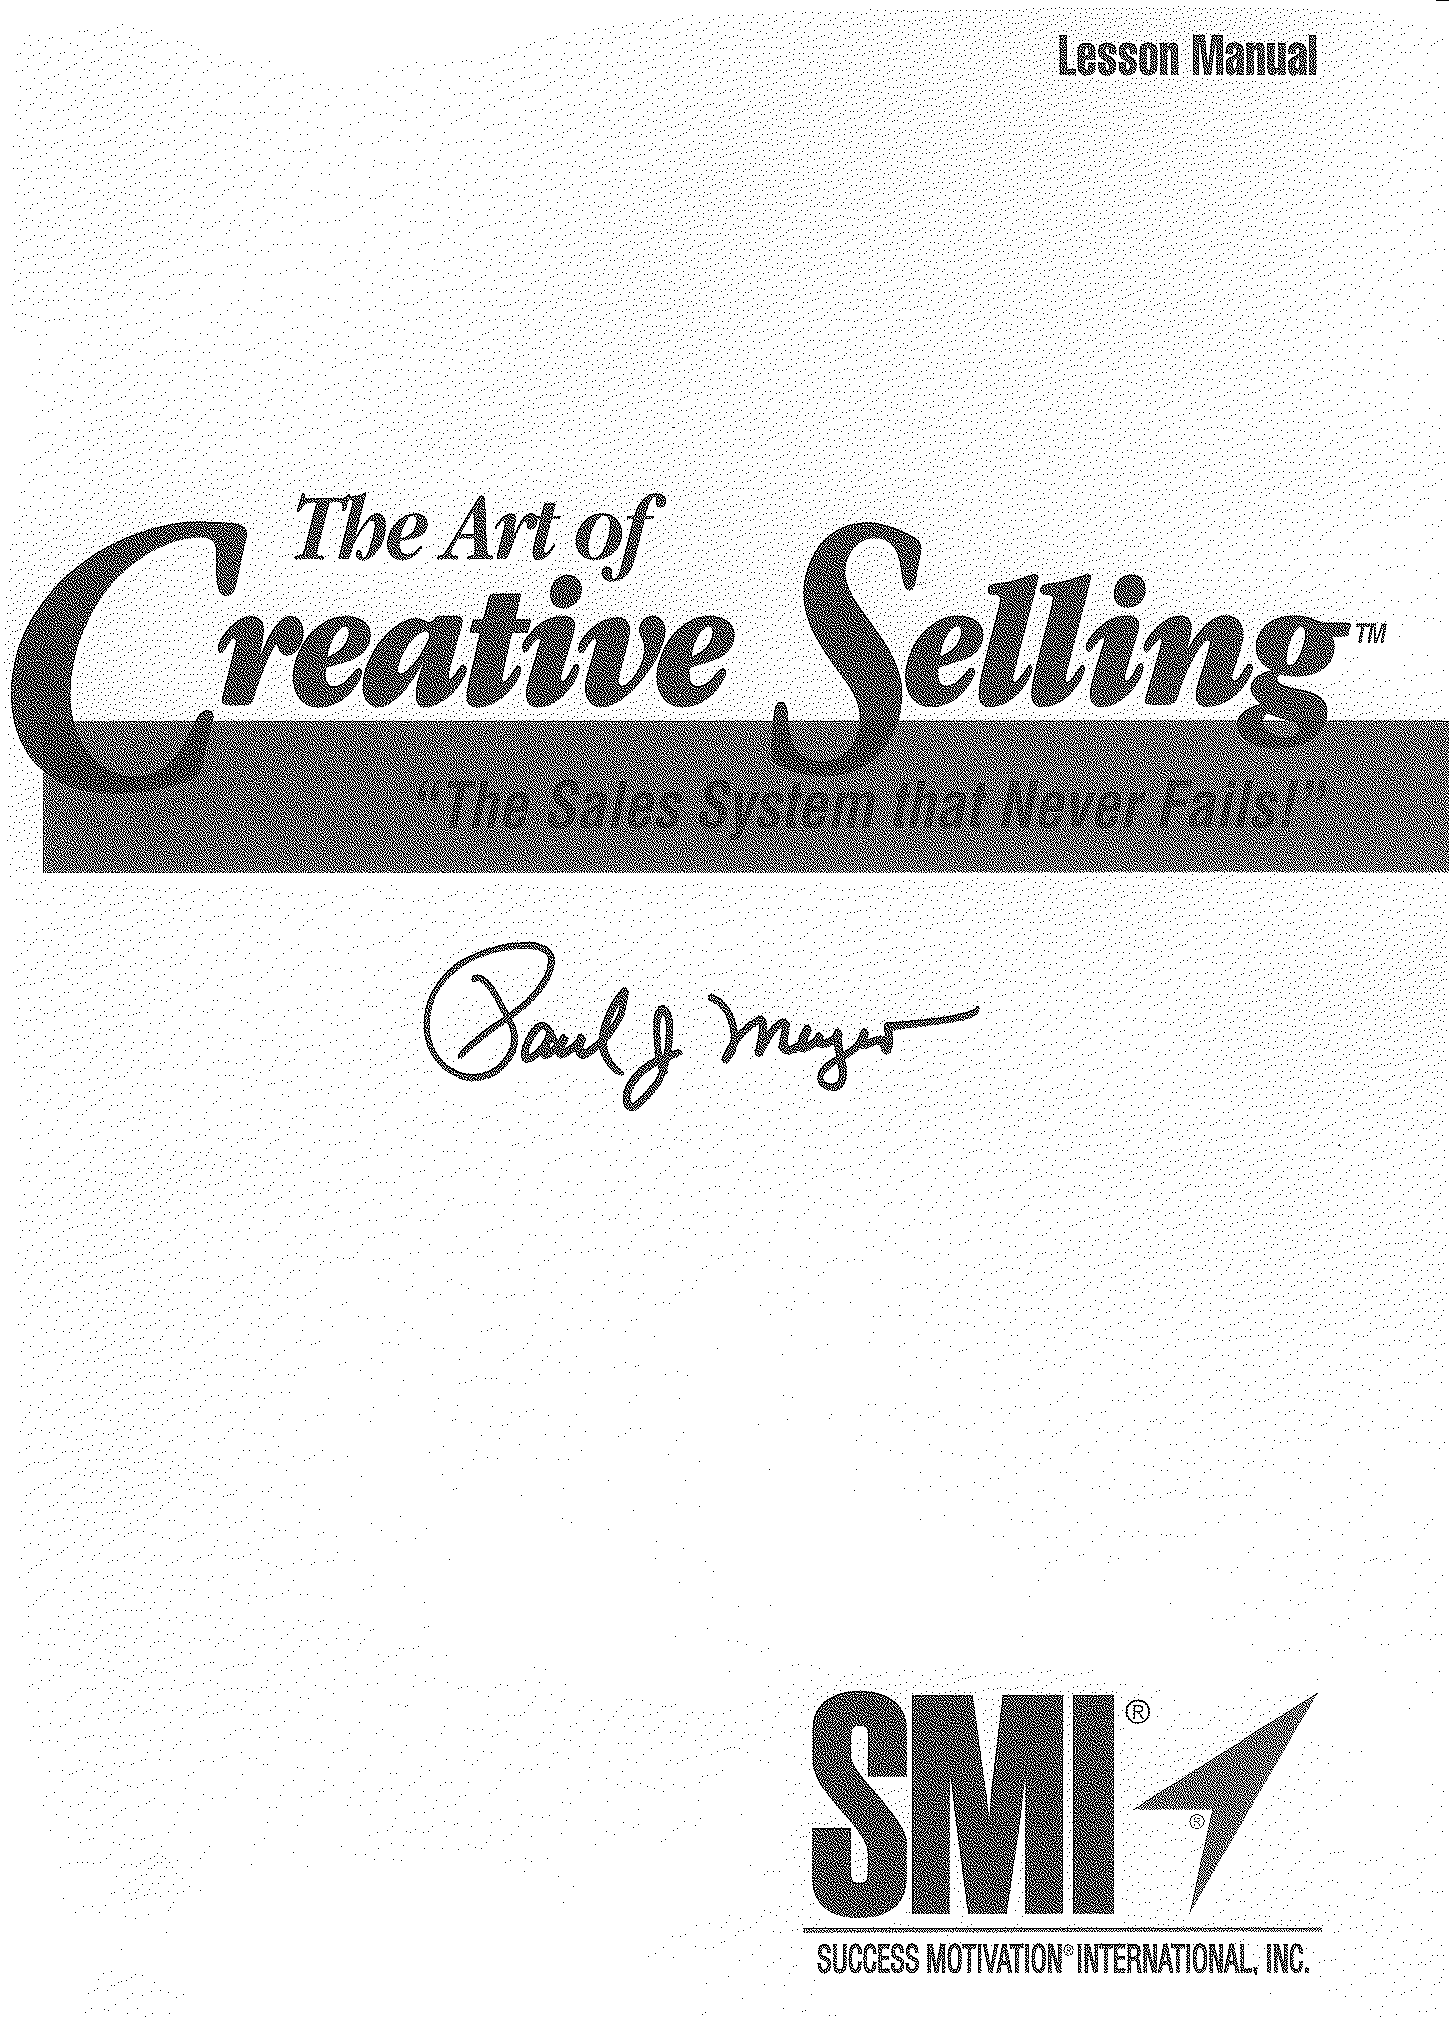  THE ART OF CREATIVE SELLING "THE SALES SYSTEM THAT NEVER FALLS!" PAUL J MEYER SMI